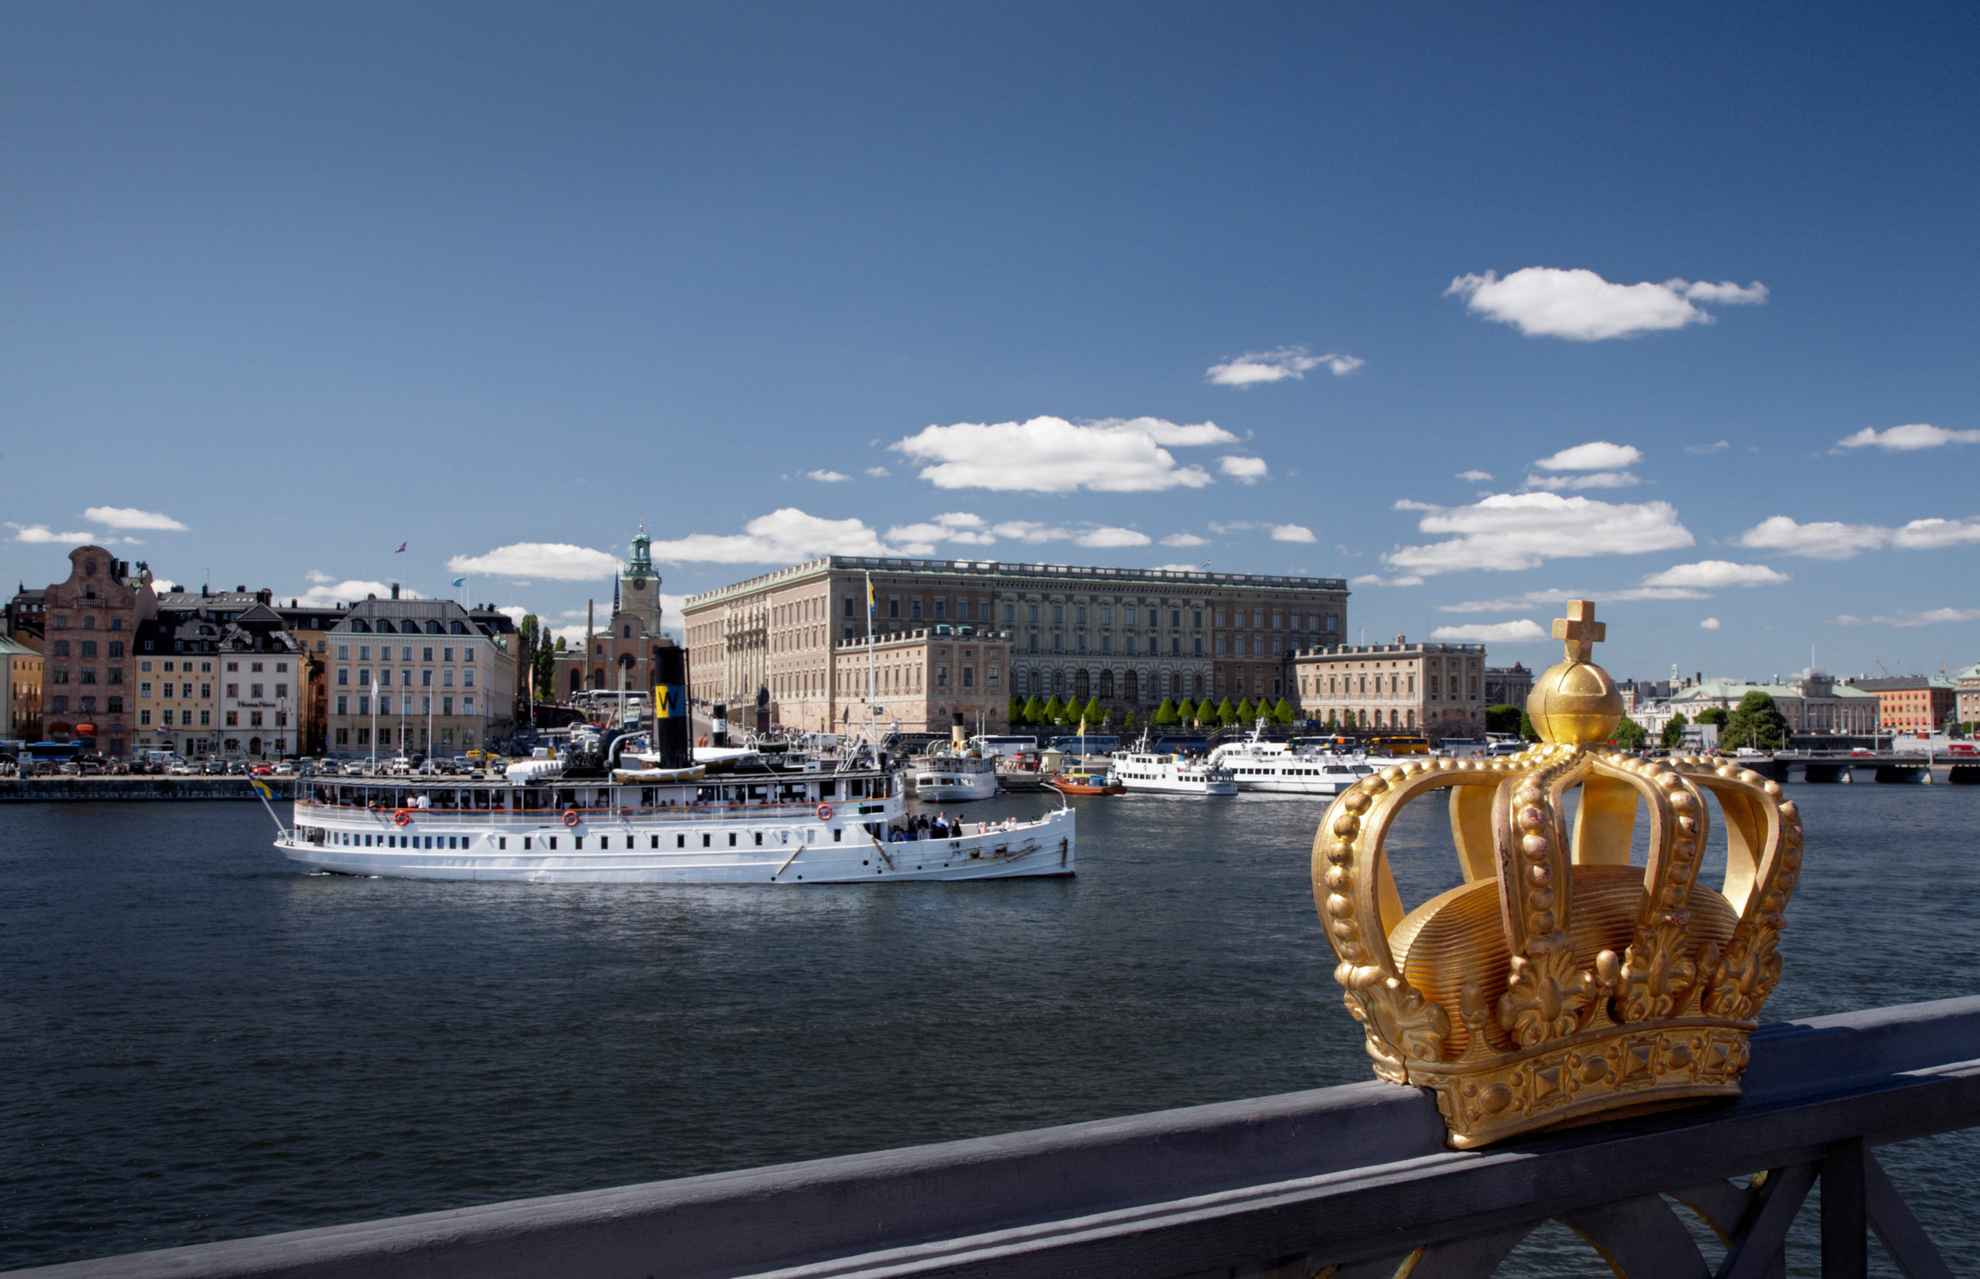 A golden crown fastened to the Skeppsholm Bridge with the Royal Castle and ferry boats in the background.